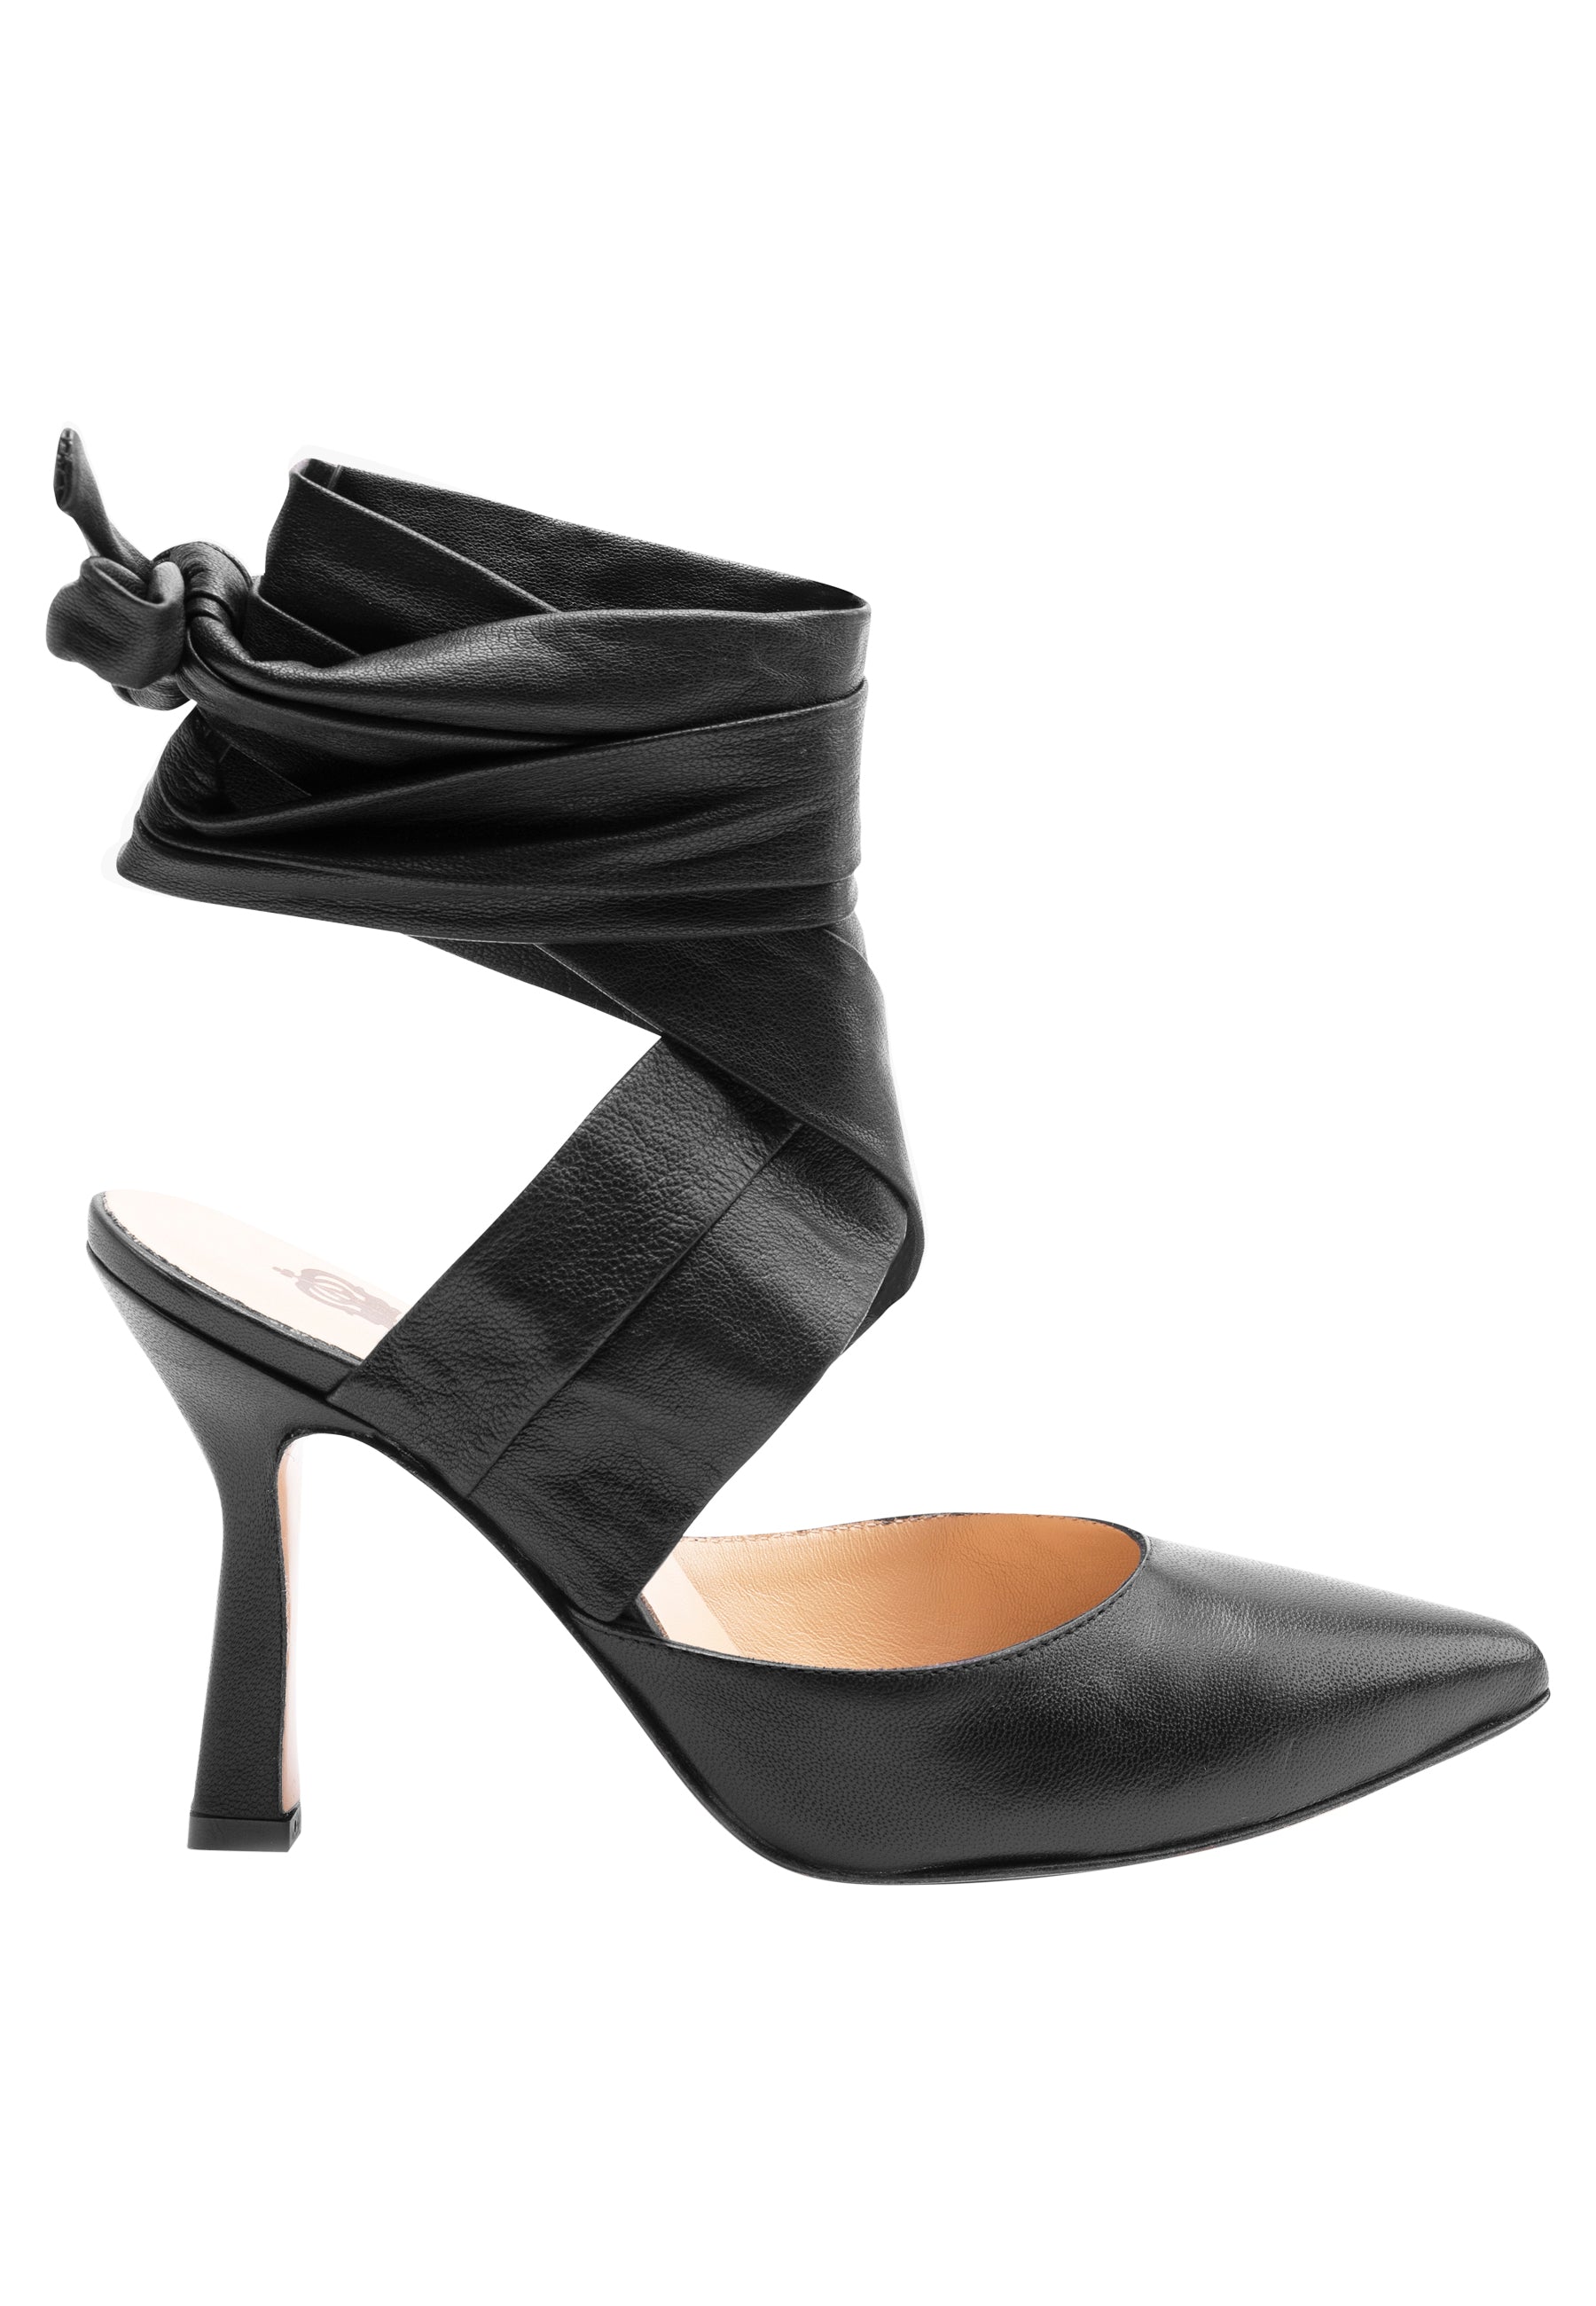 Women's black leather sandals with ankle laces and high heel